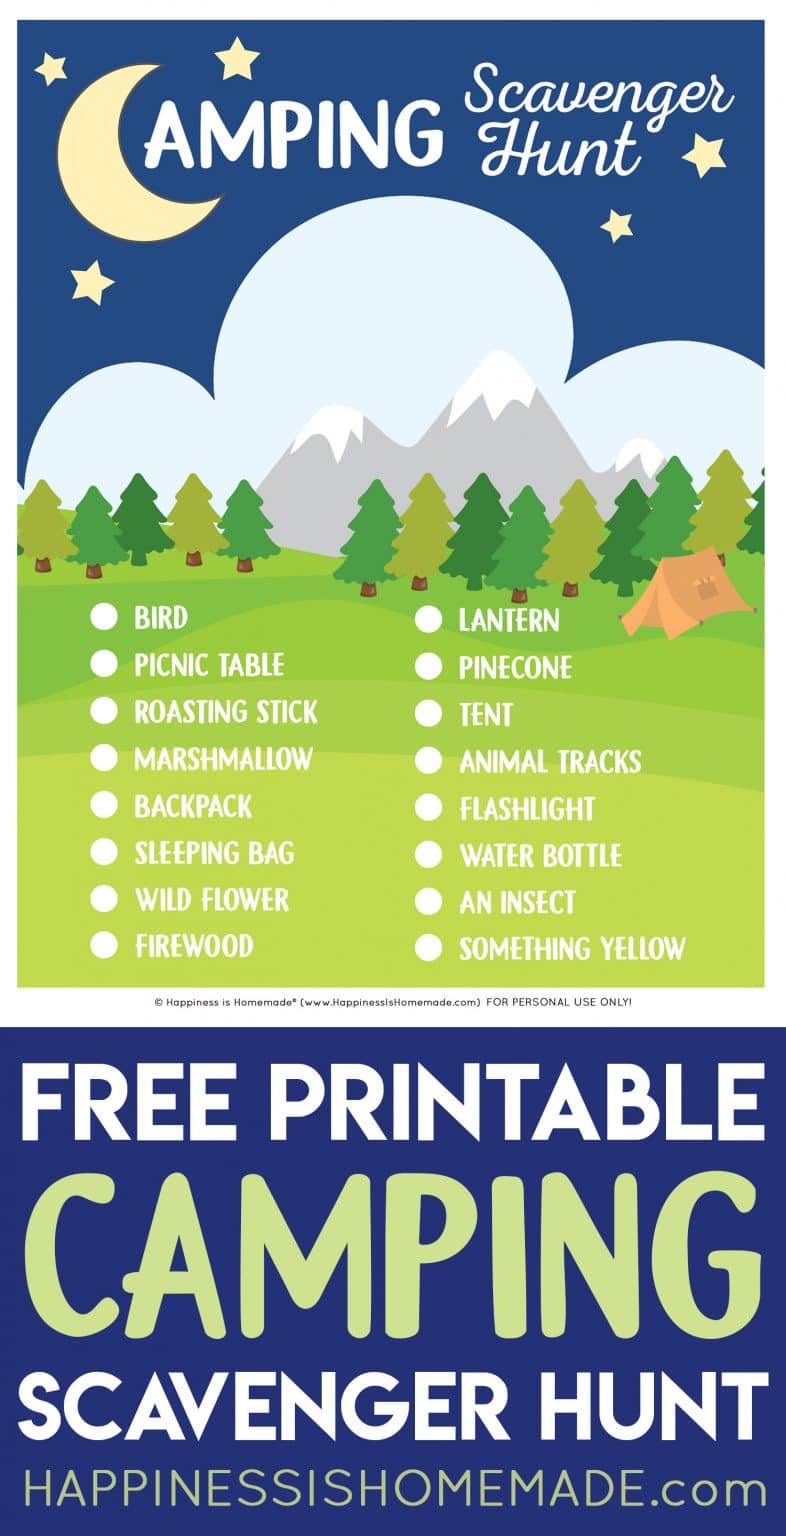 Free Printable Camping Scavenger Hunt - Happiness is Homemade